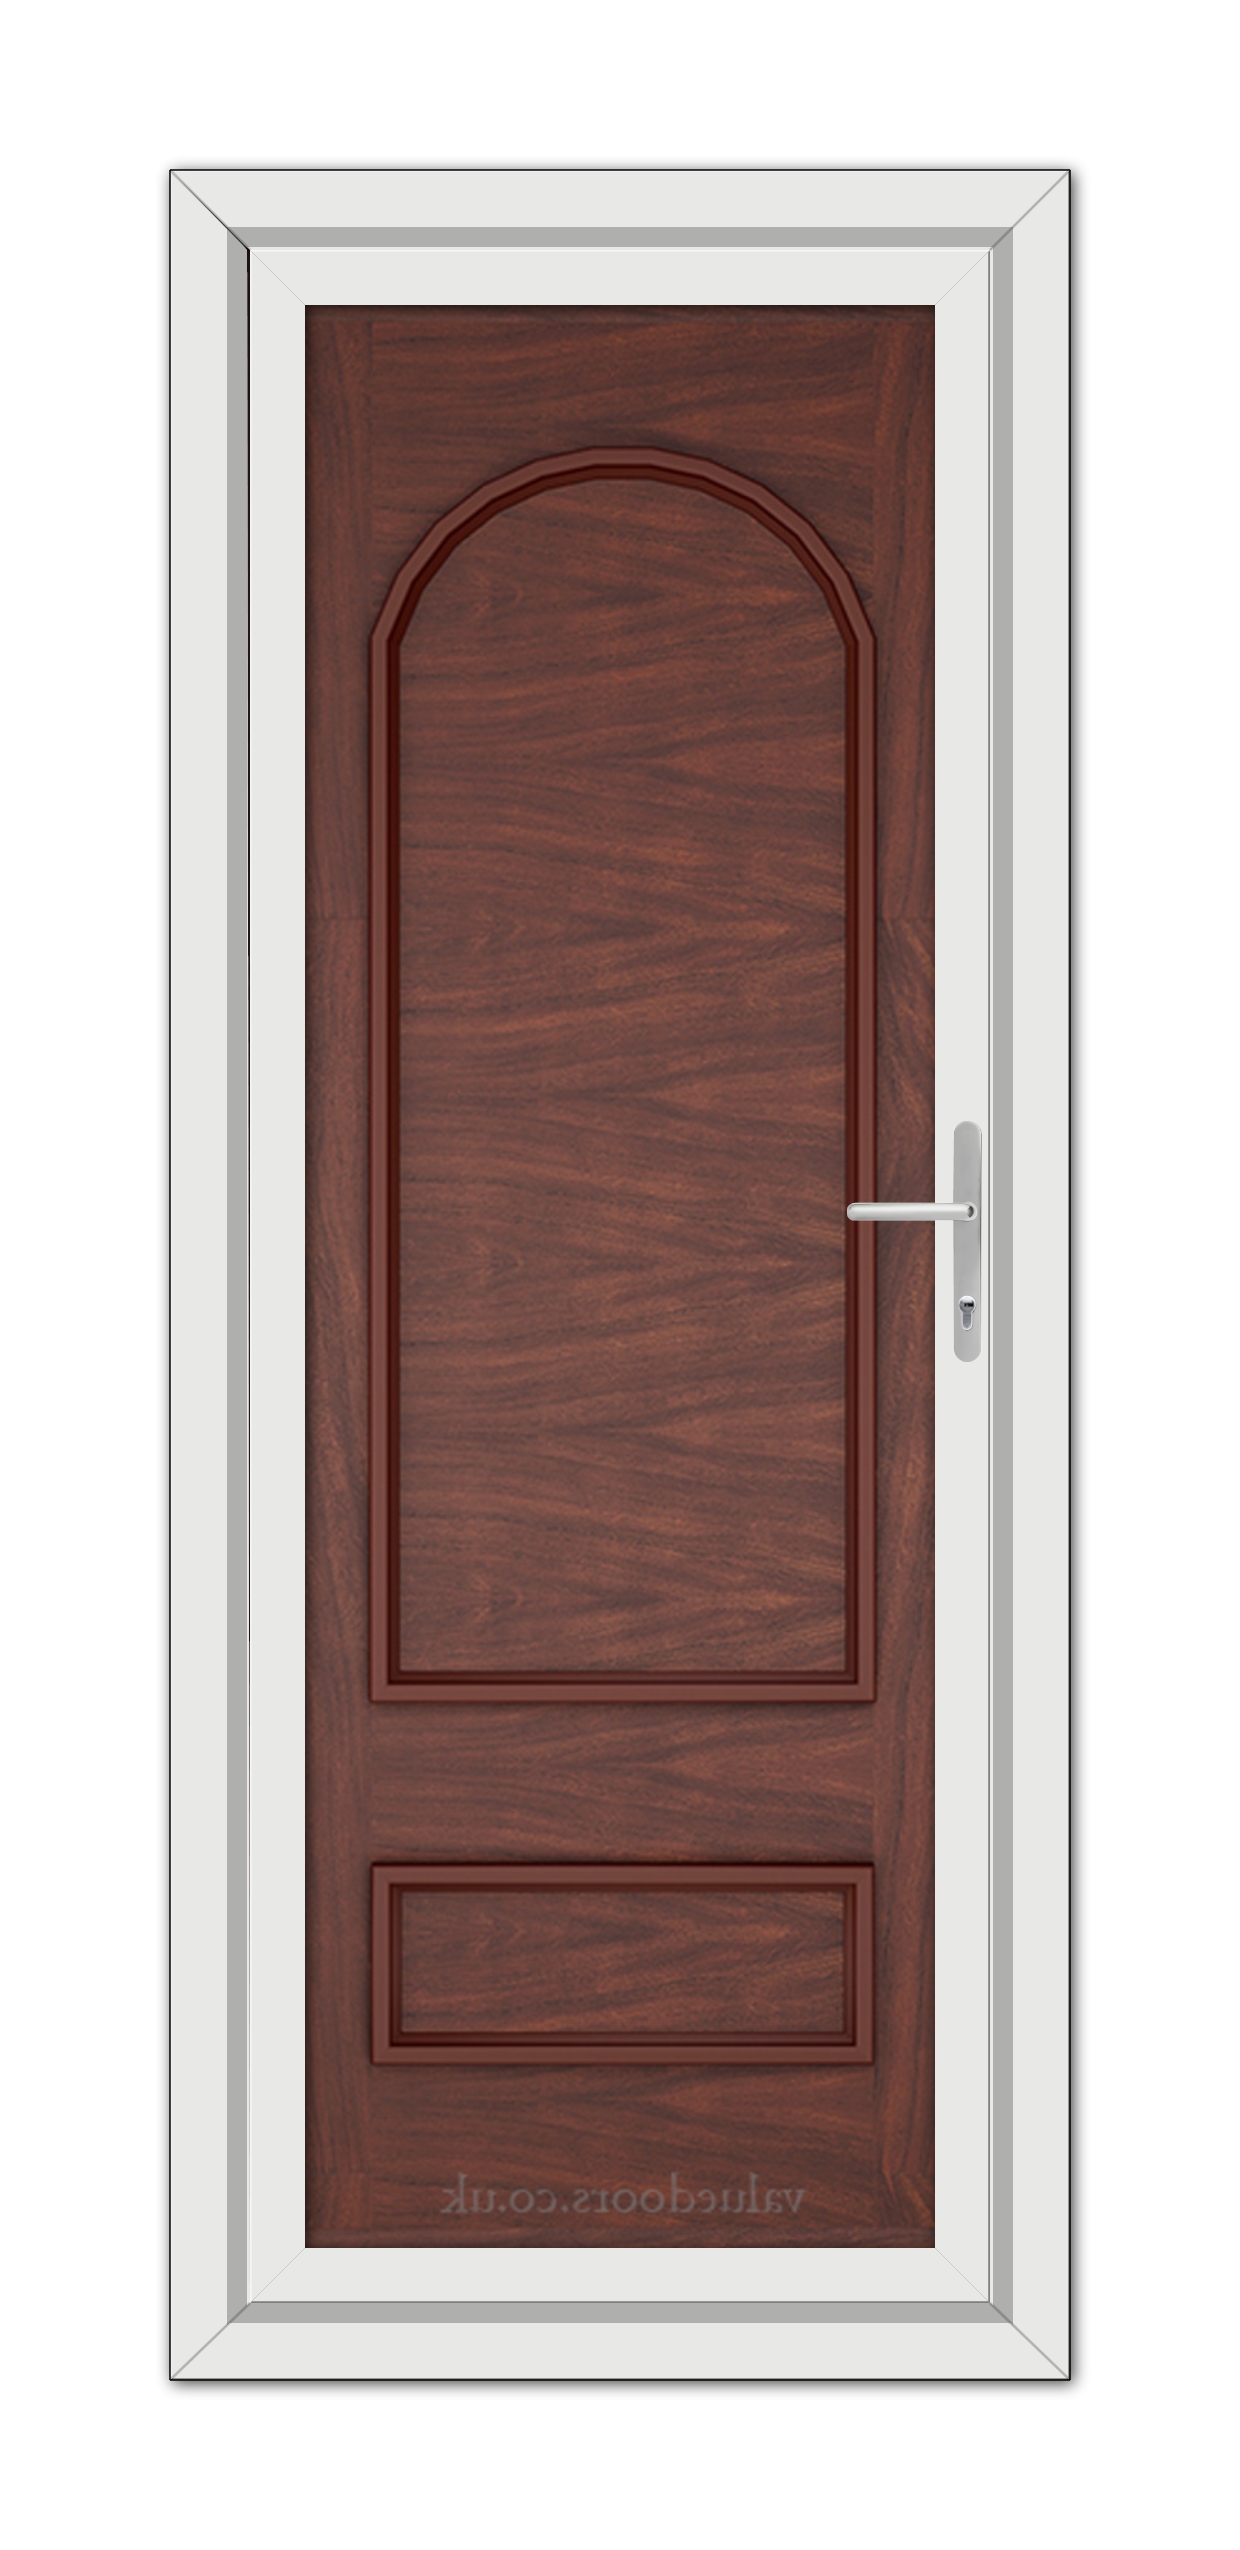 A close-up of a Rosewood Canterbury Solid uPVC Door.